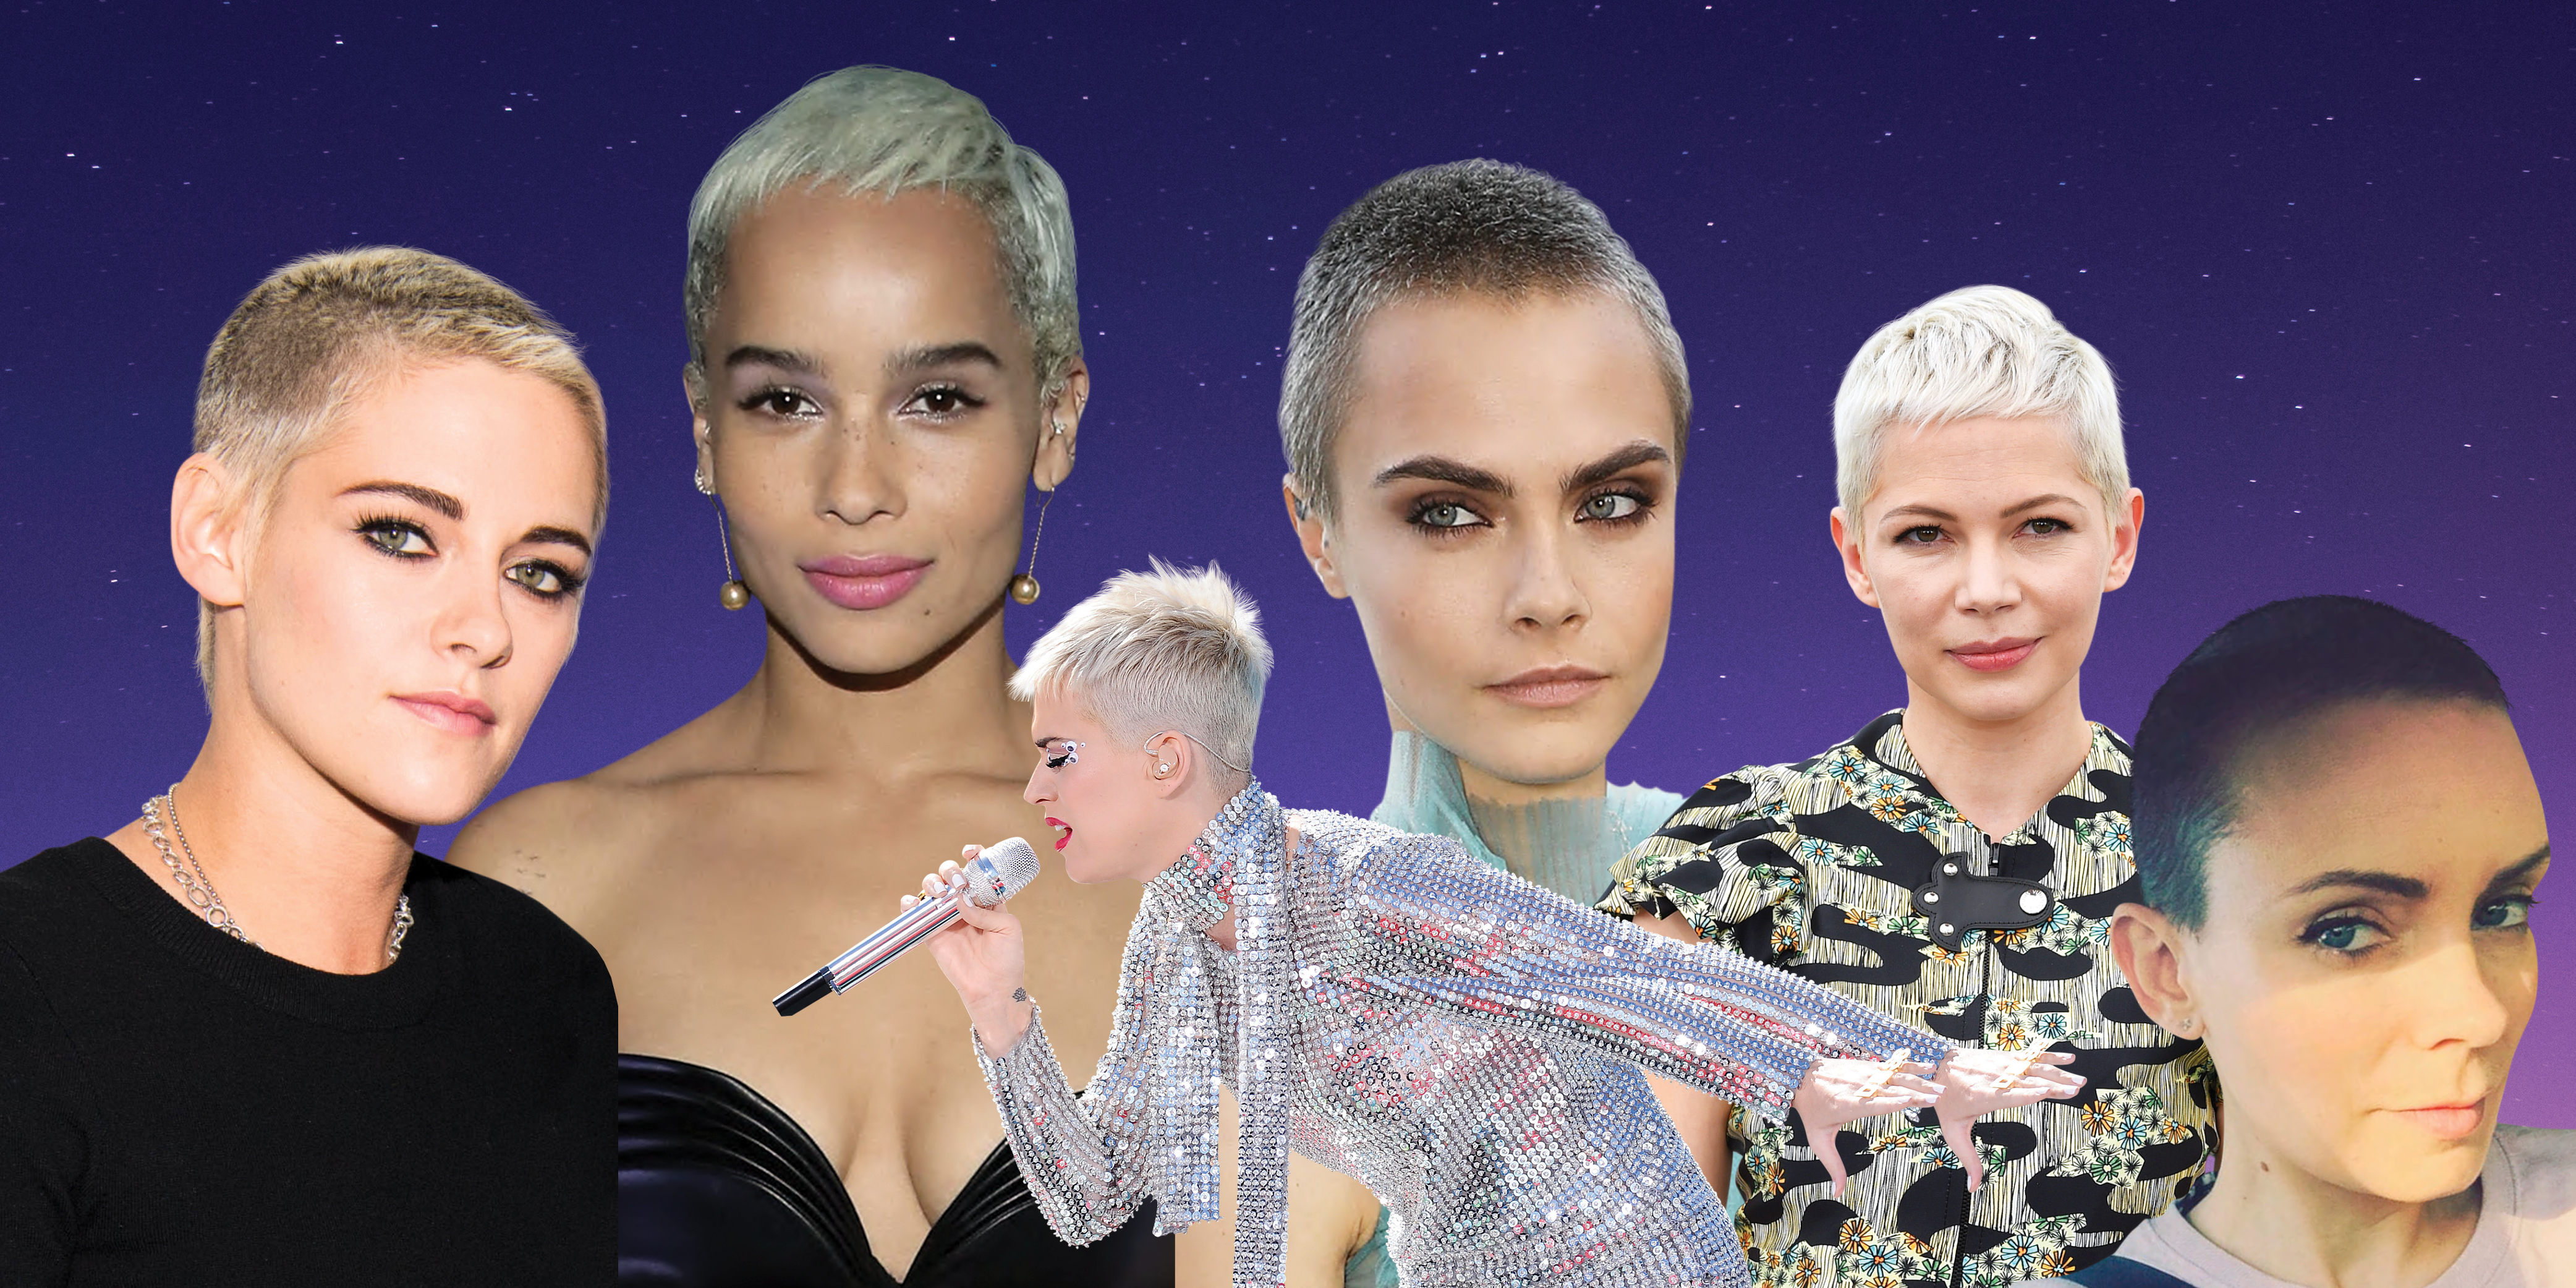 A little political and a lot fashion, the platinum pixie cut is definitely a thing, says Sarah Murray